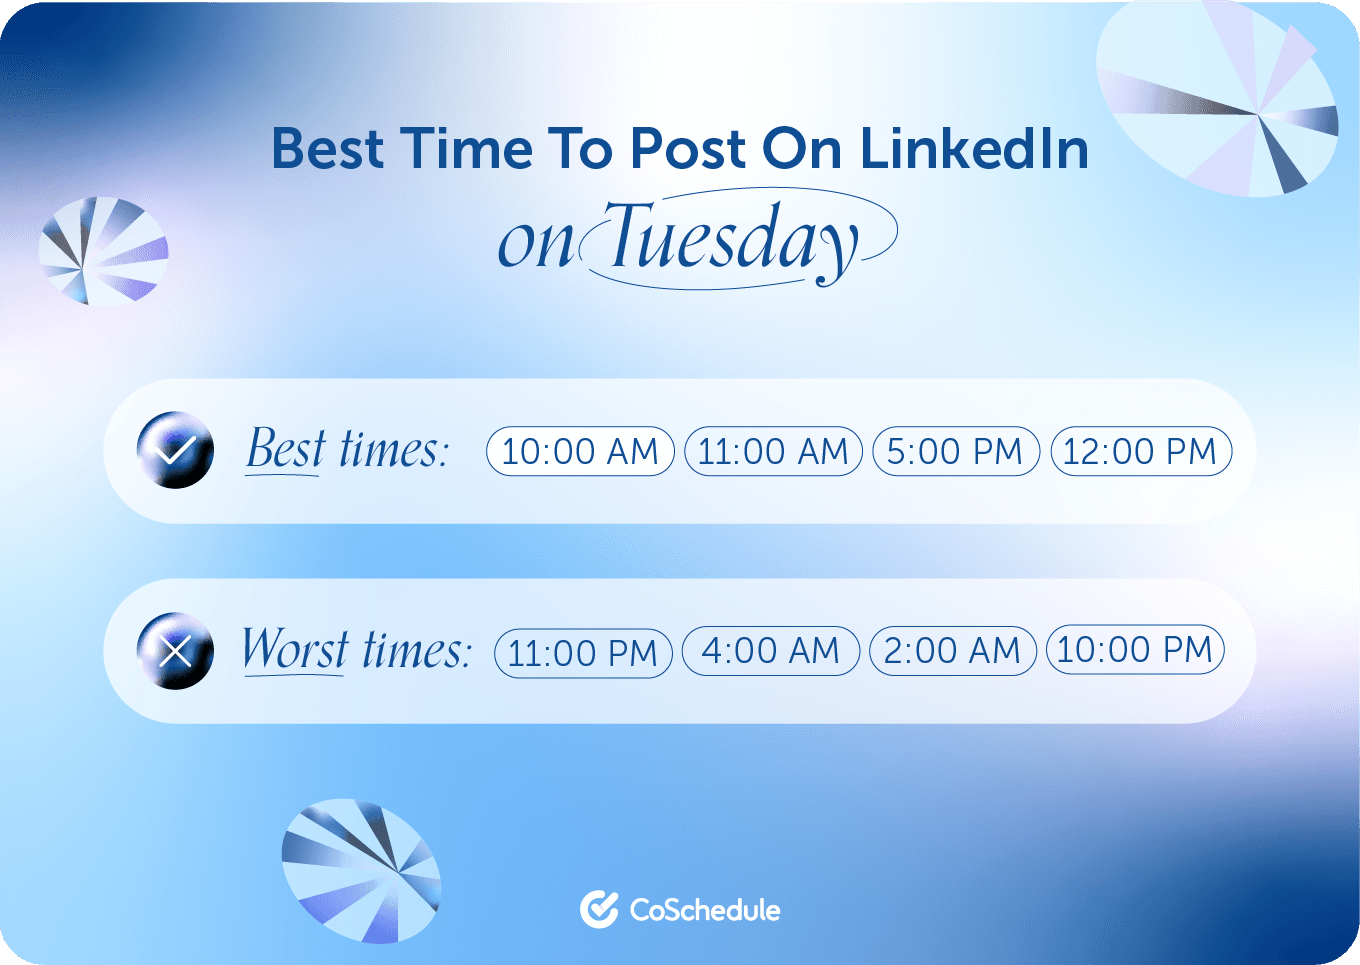 CoSchedule graphic on the best times to post on LinkedIn Tuesday